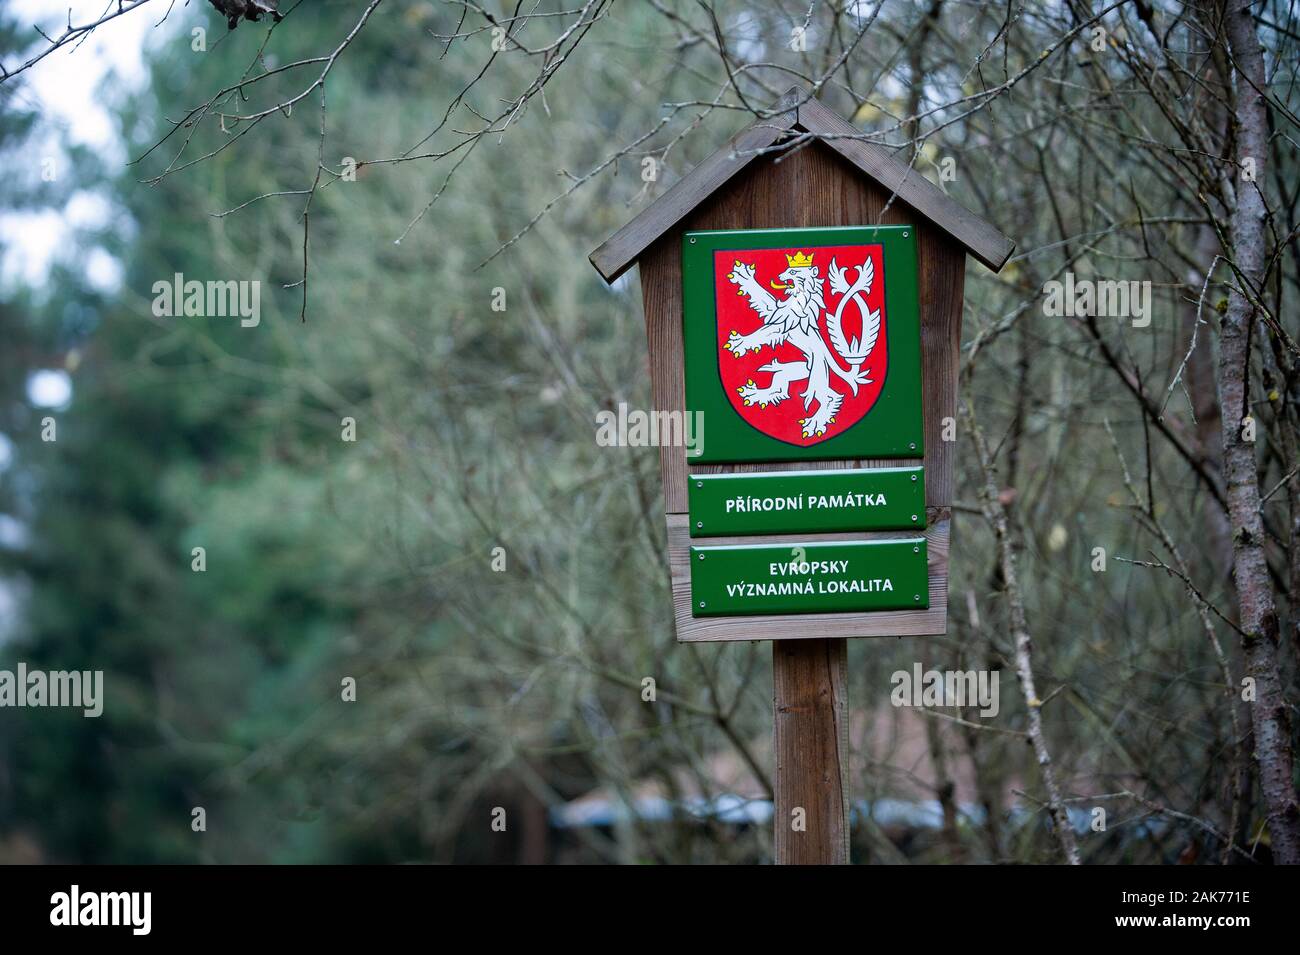 Czech Republic, November 2019. Sign with text in Czech language: Prirodni pamatka and Evropsky vyznamna lokalita, in English: Natural monument and Sit Stock Photo